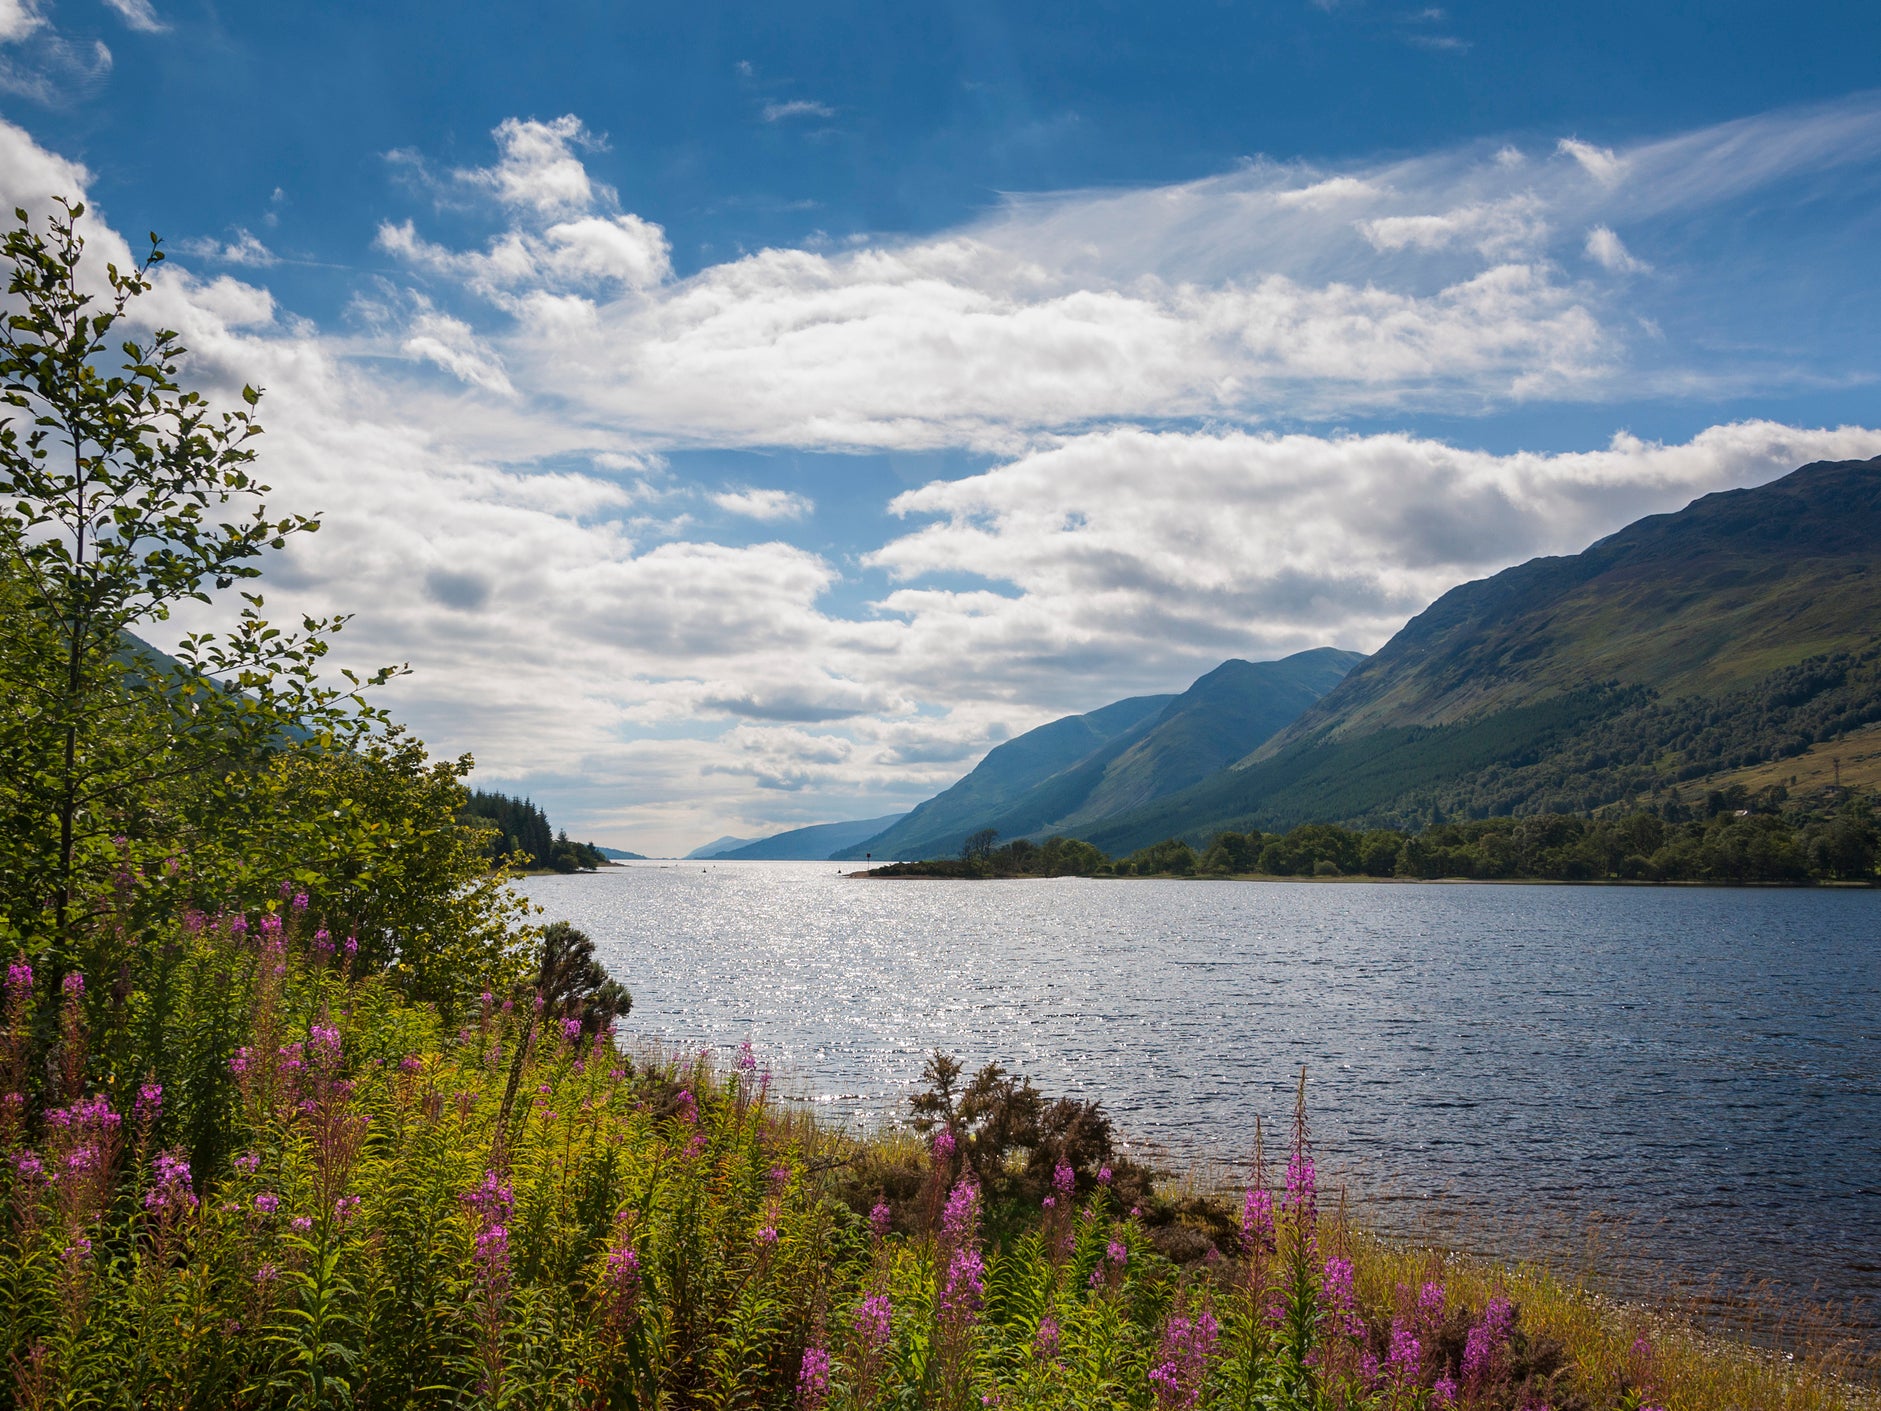 The 500-hectare Bunloit estate in the Scottish Highlands is on the edge of Loch Ness